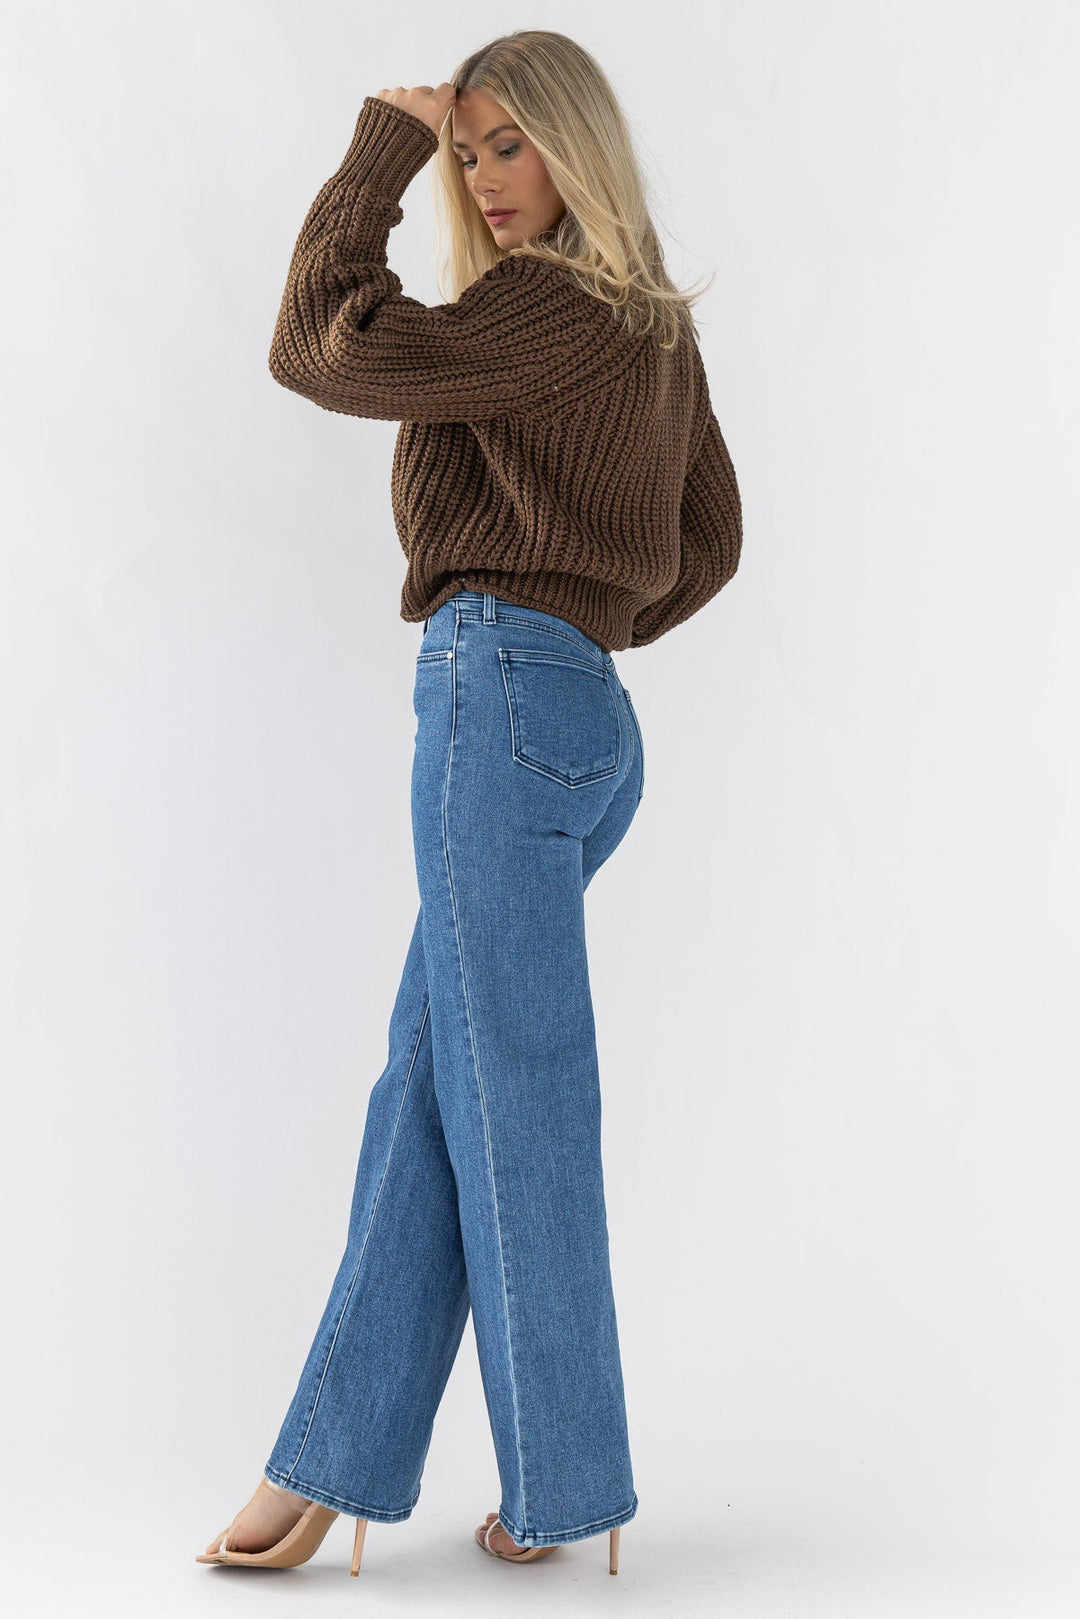 Cozy Conditions Sweater - Brown - JO+CO